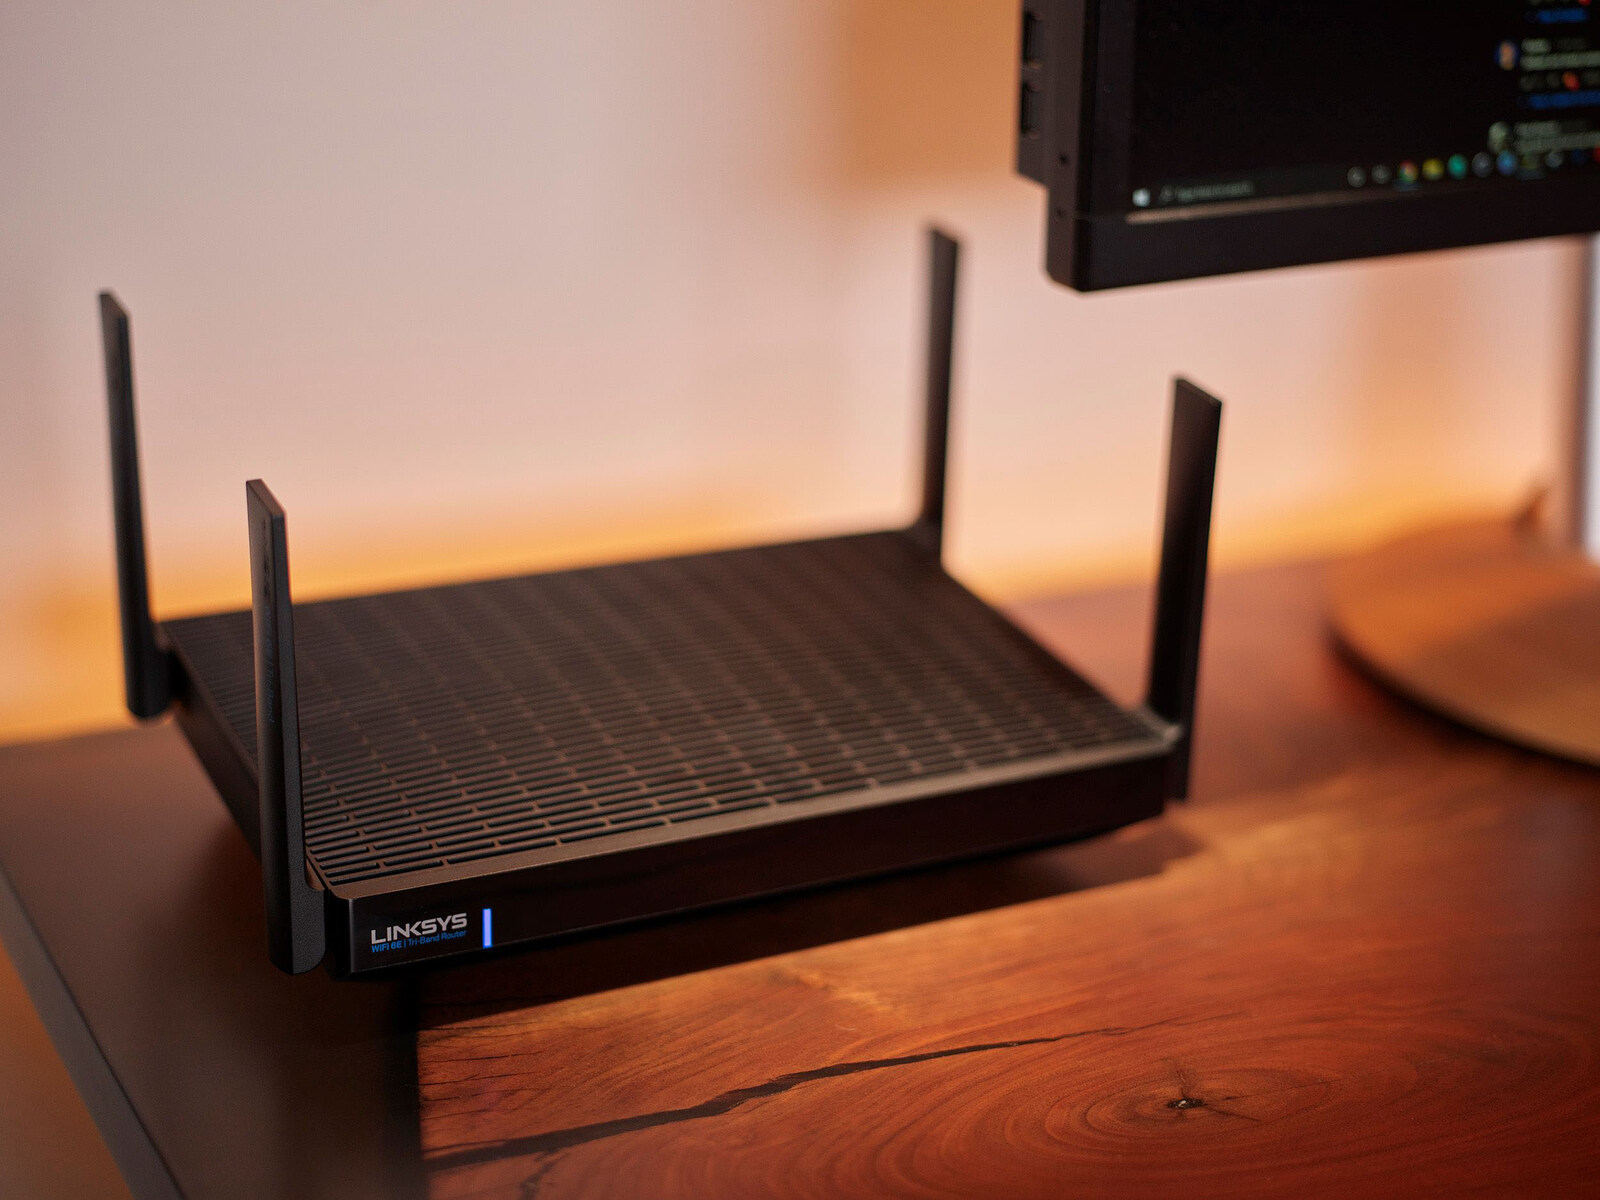 How To Connect Linksys Wireless Router To AT&T DSL